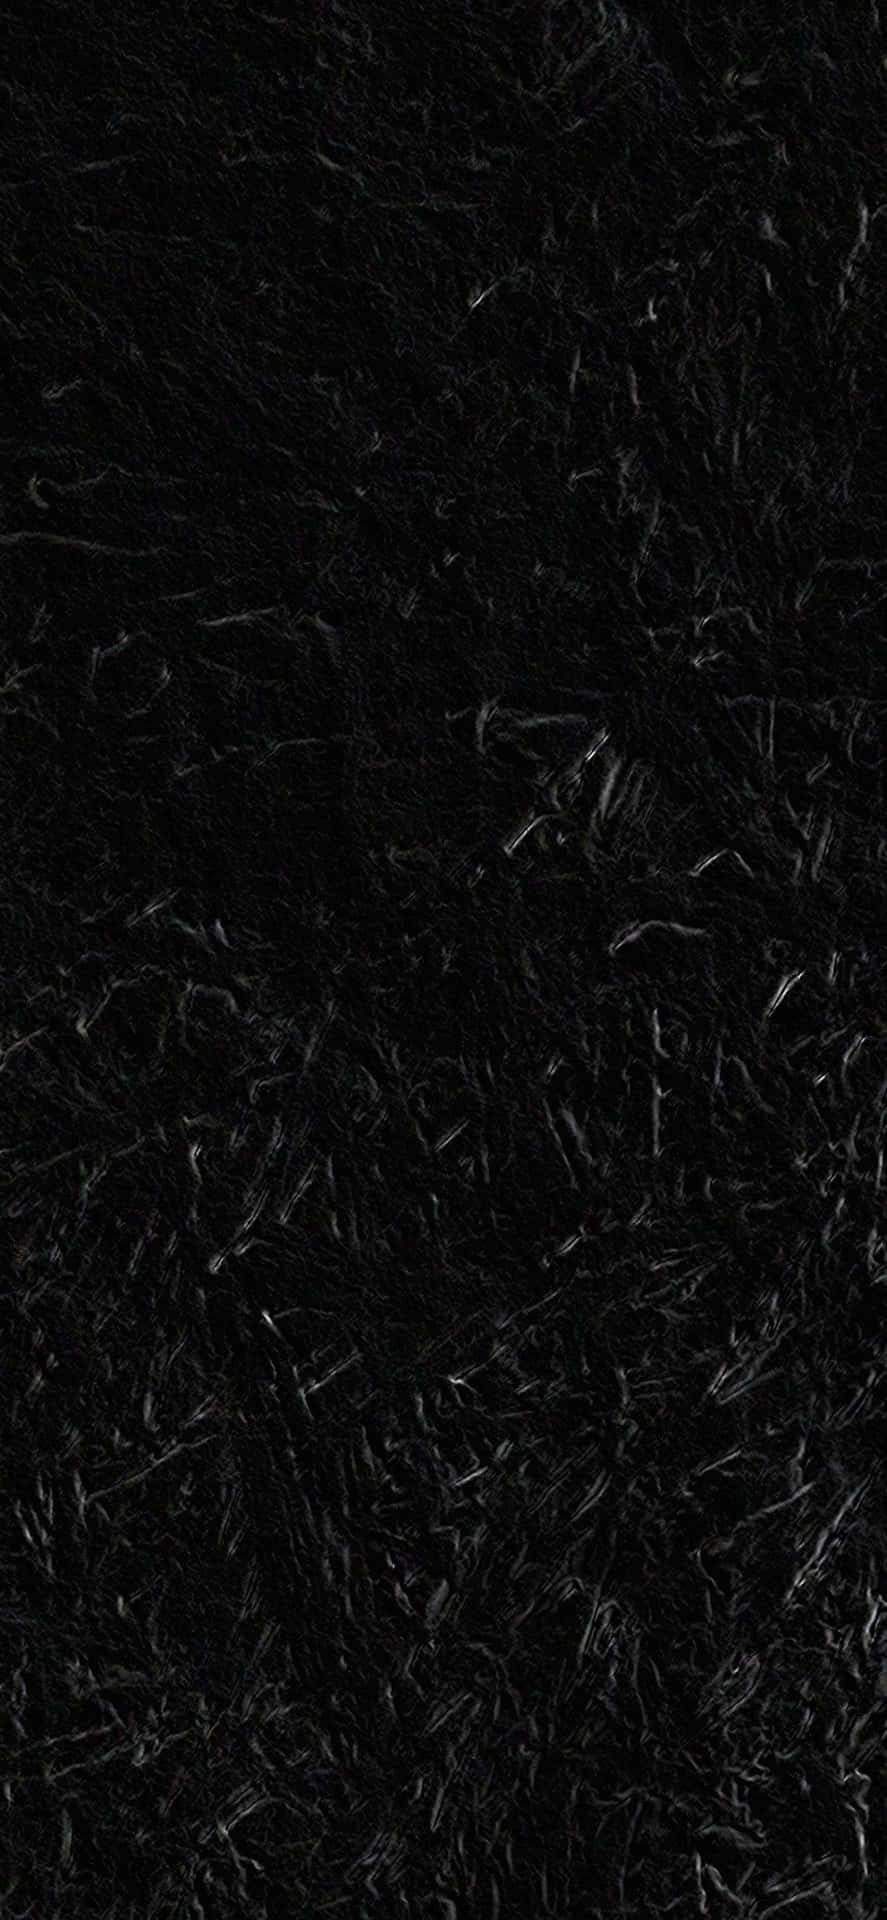 A Black Rug With A Black Background Wallpaper